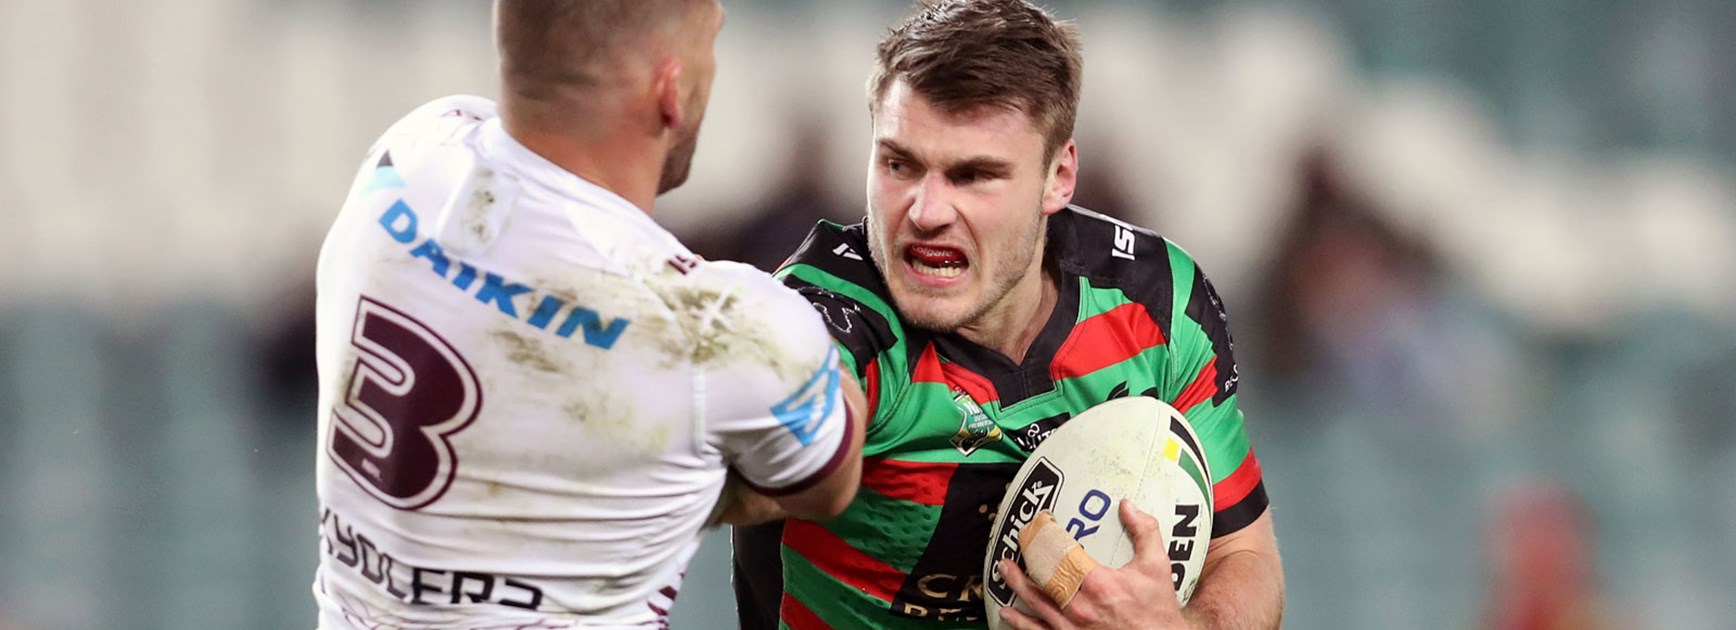 Rabbitohs young gun Angus Crichton against the Sea Eagles in Round 20.